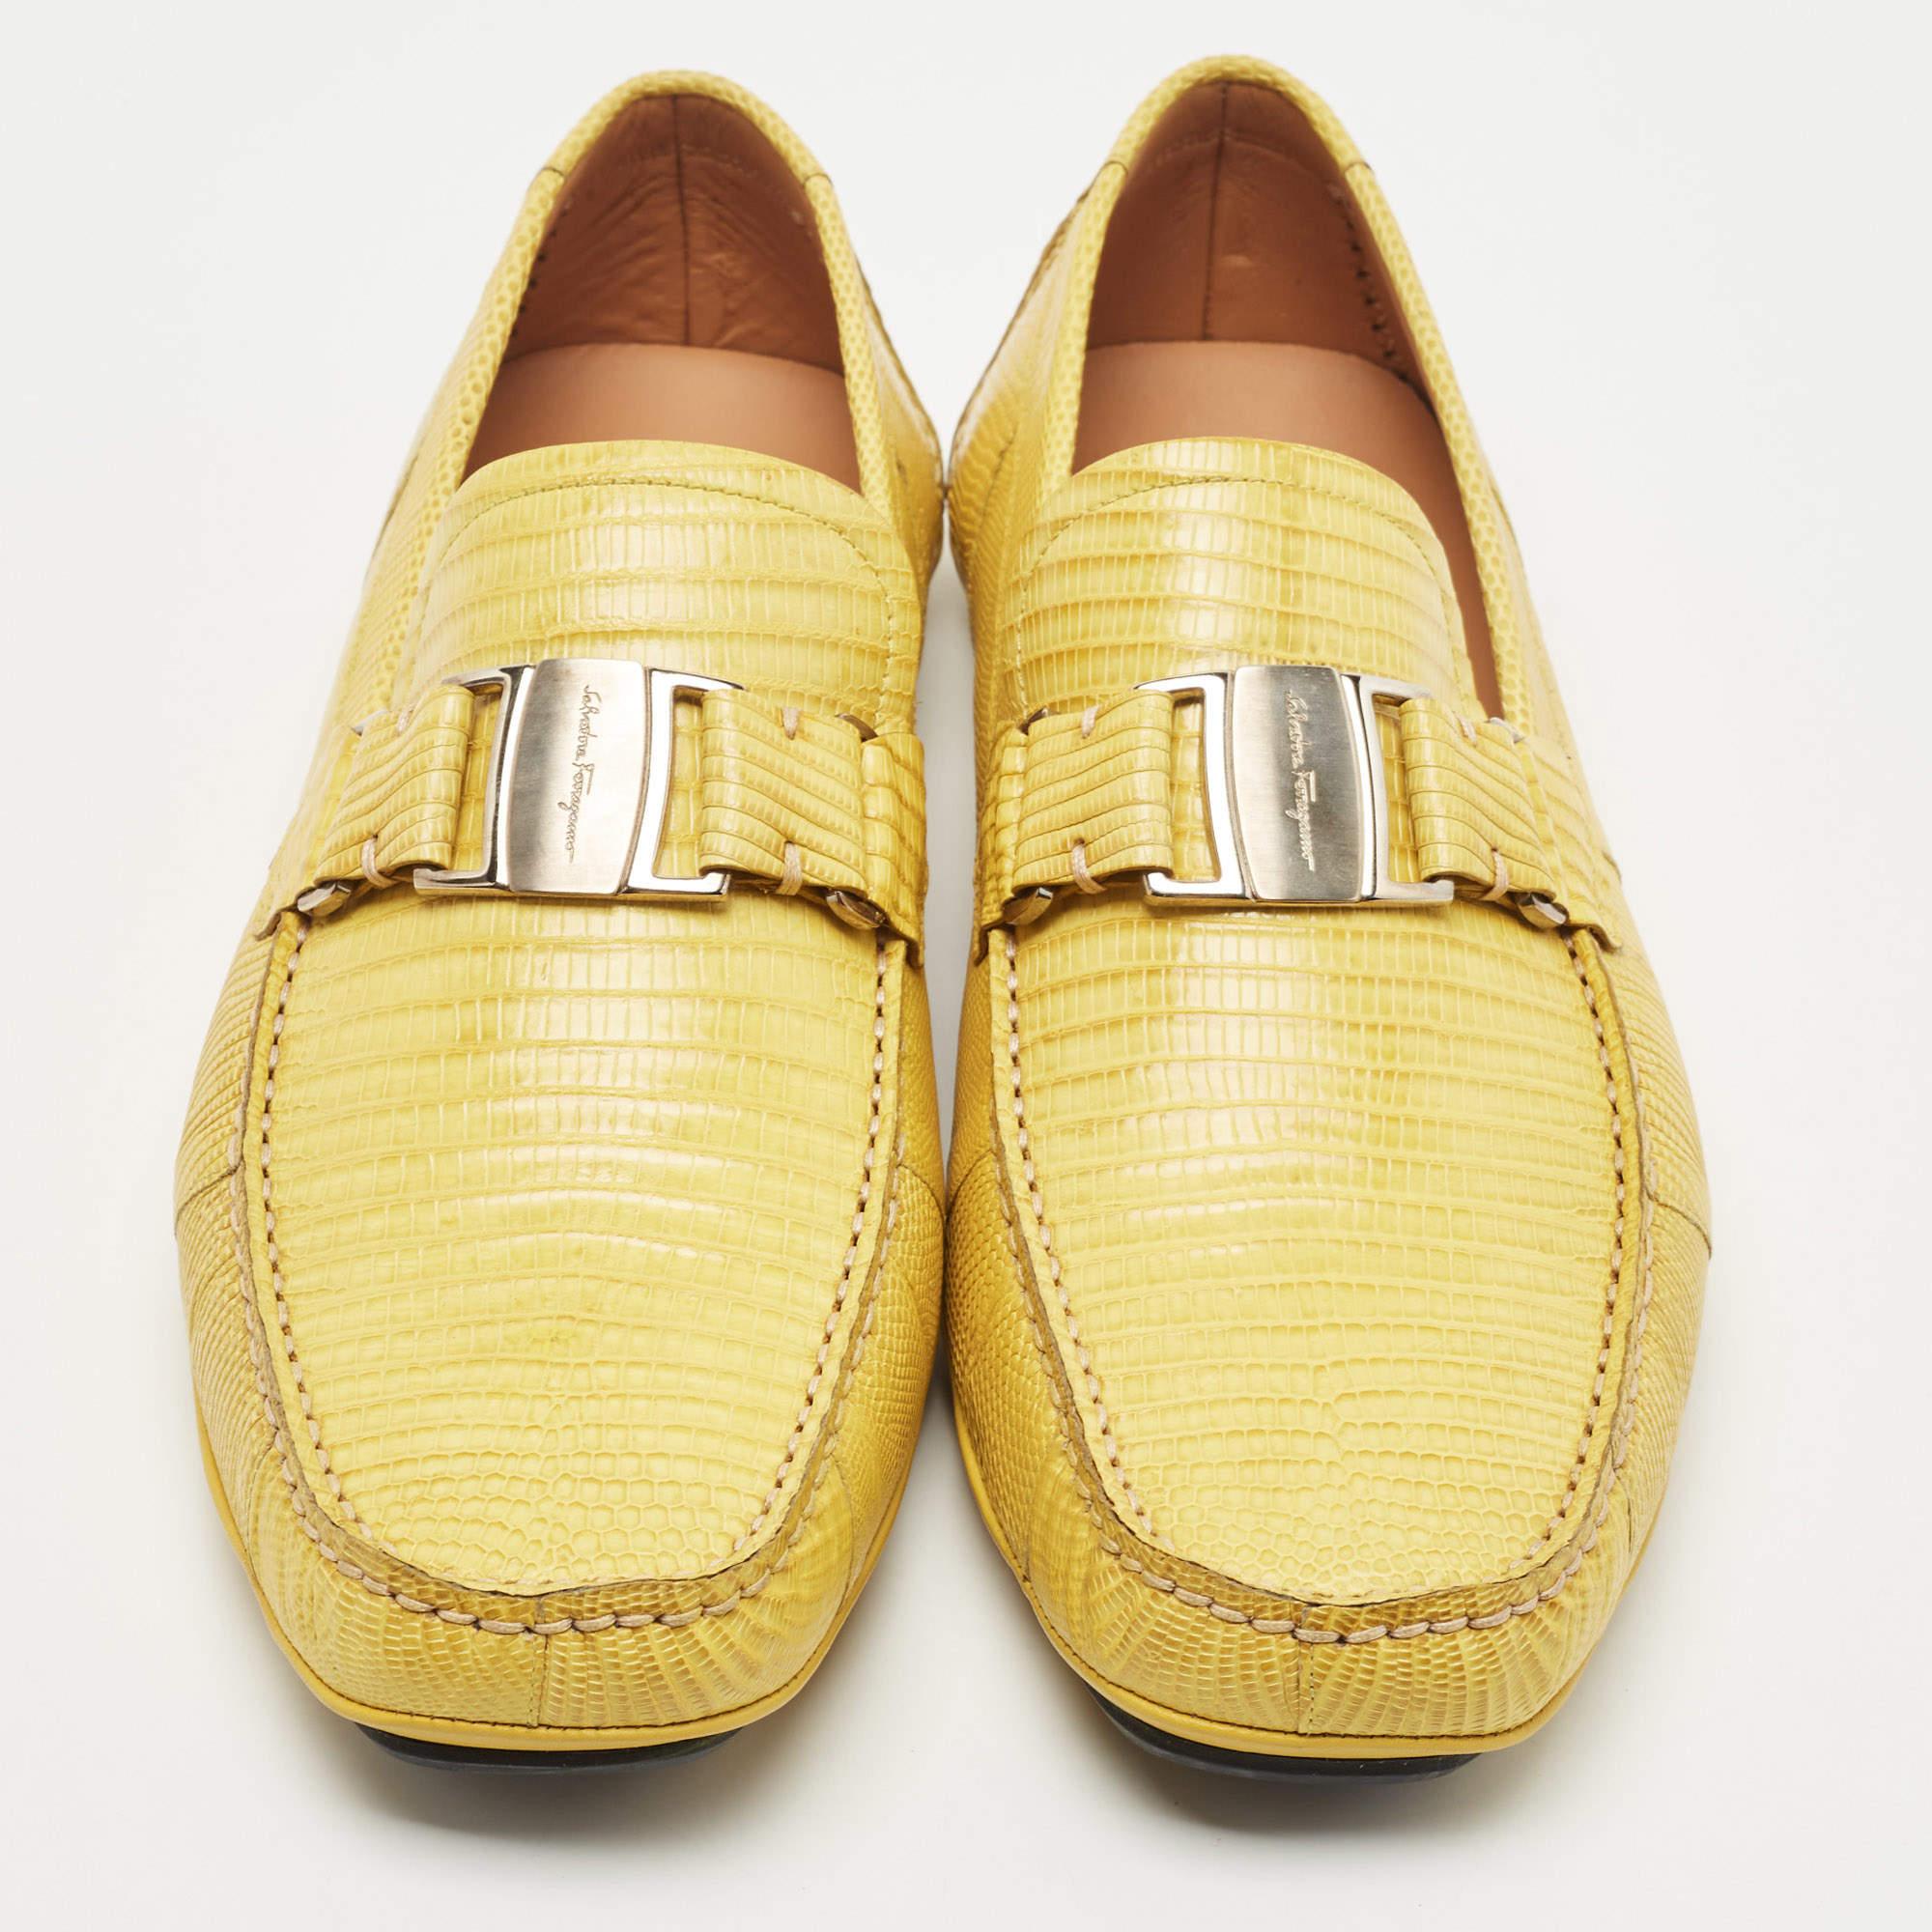 Created using exotic lizard leather, these Sardegna loafers from Salvatore Ferragamo lend a unique aspect to your footwear collection. The loafers have a yellow shade on their exterior, with silver-toned accents decorating the vamps. Embrace a new